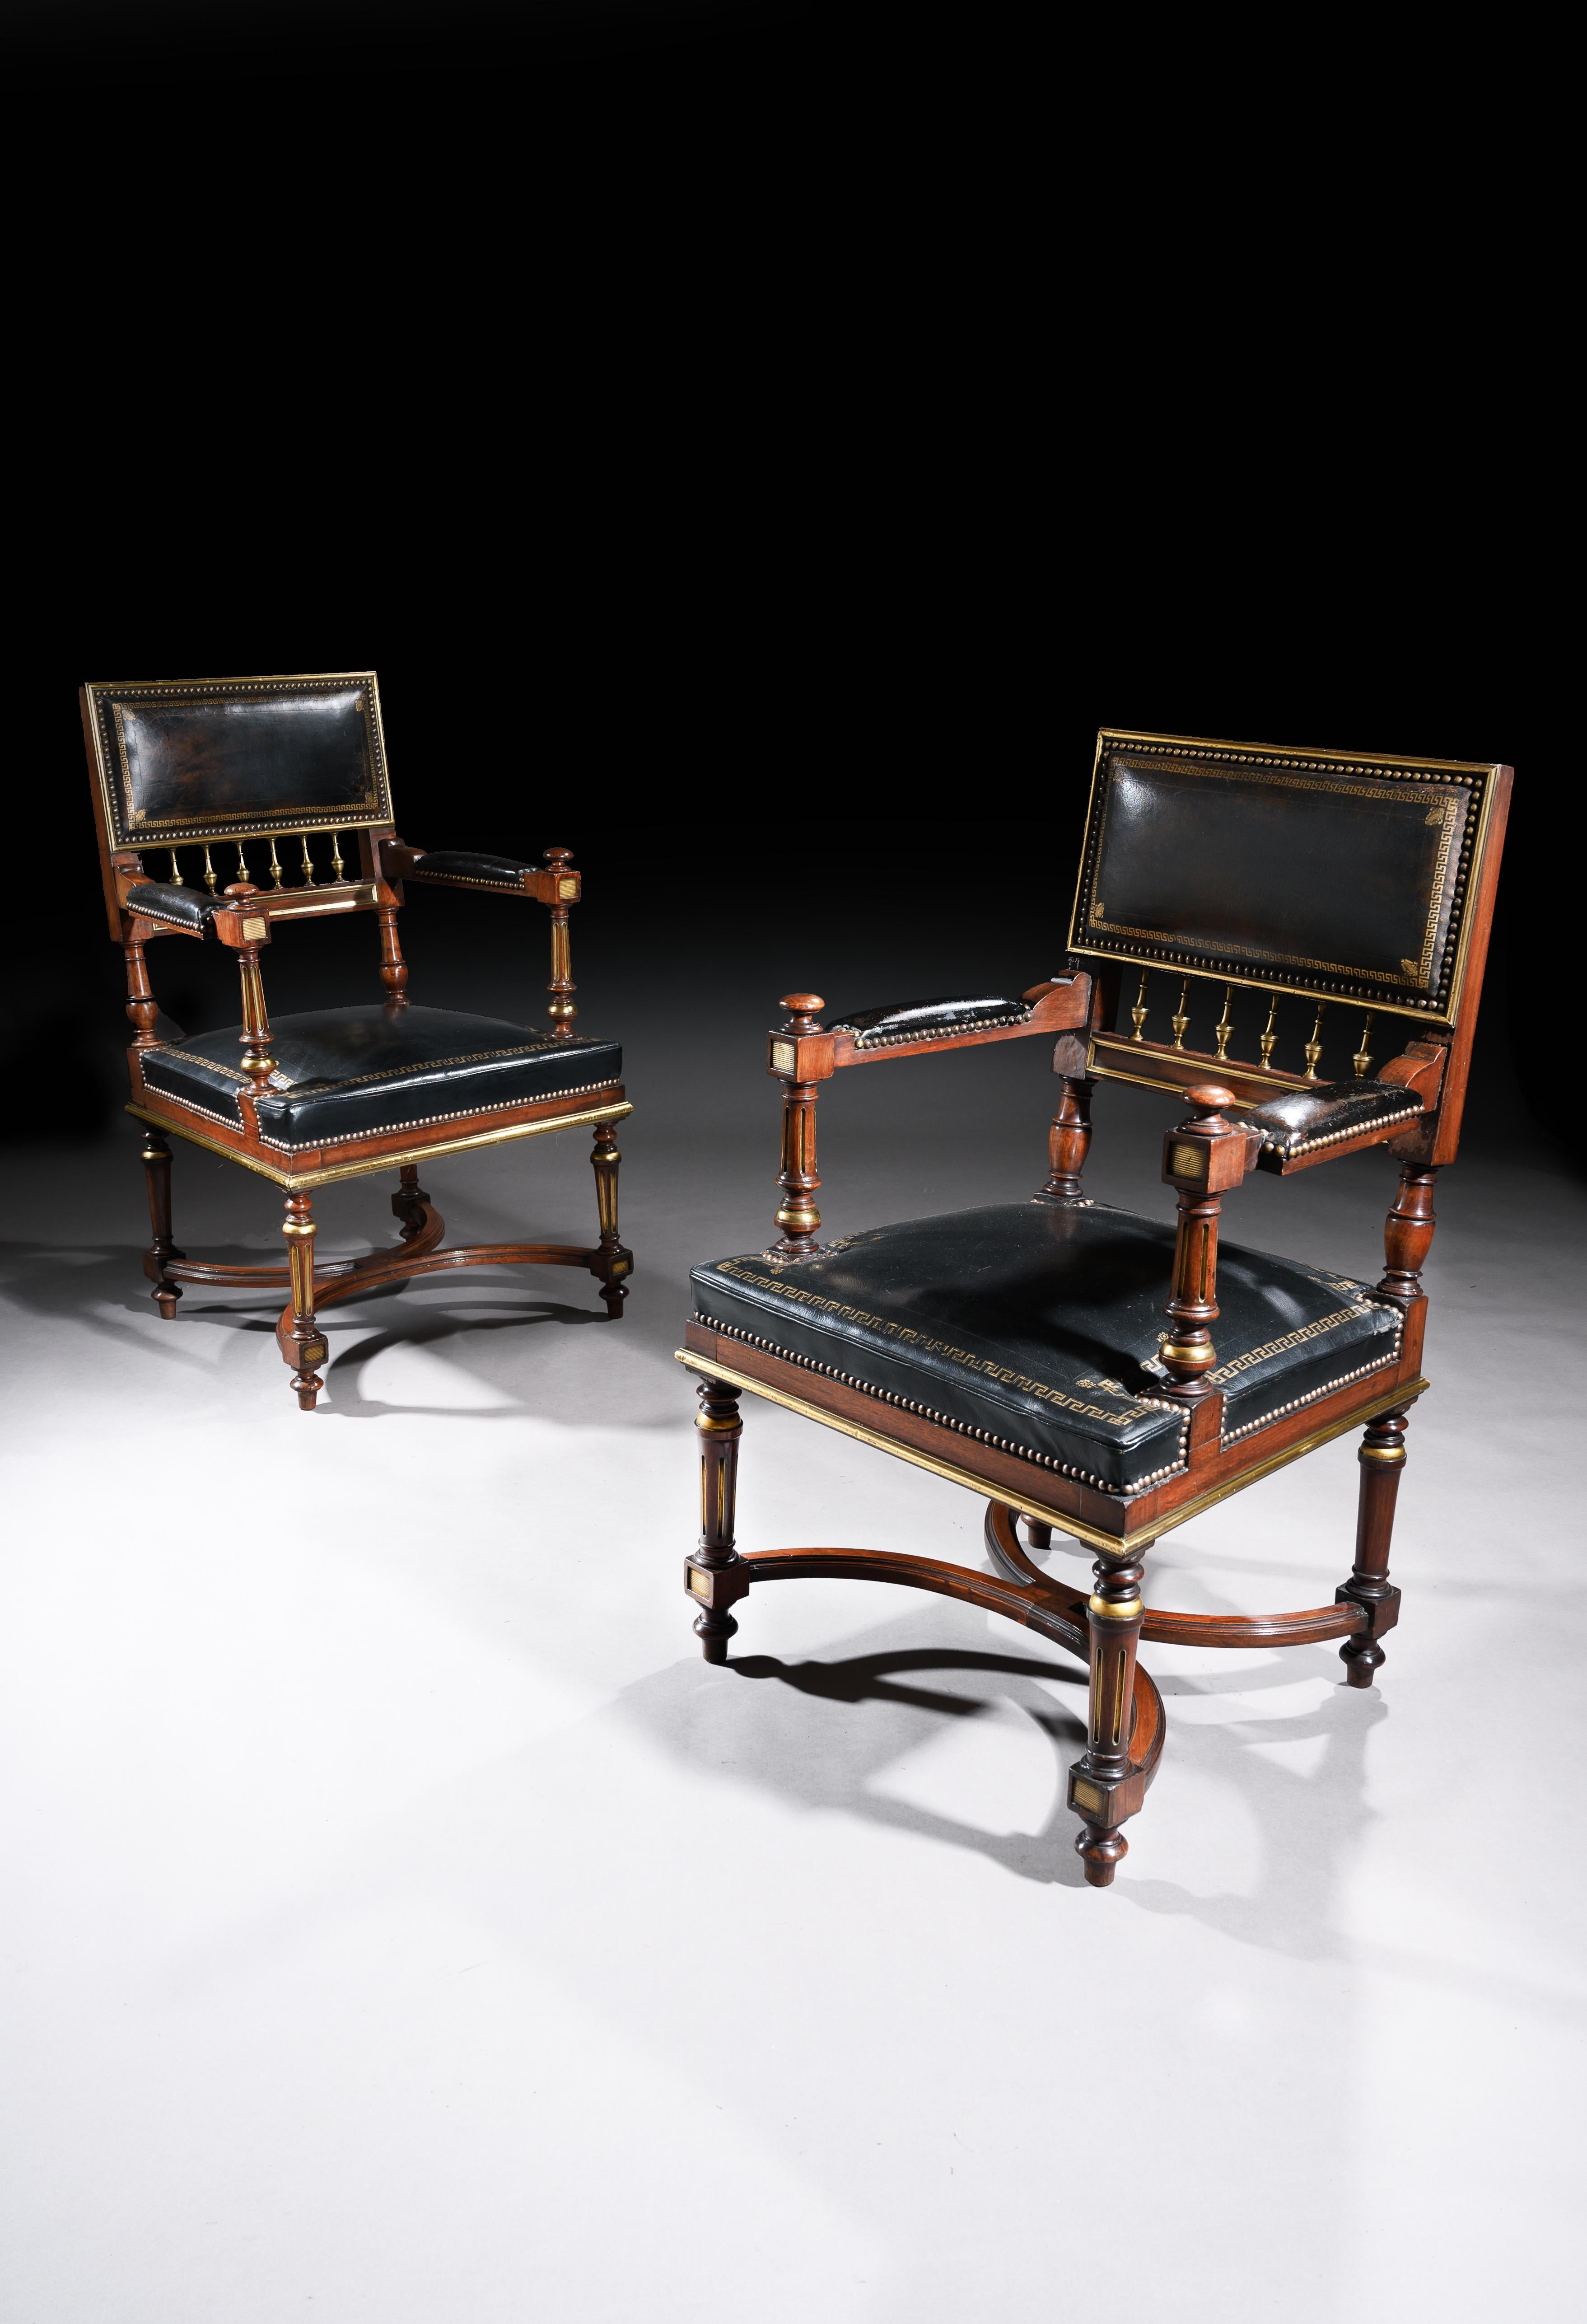 A matched pair of late 19th century French brass mounted walnut leathered open armchairs or desk chairs.

French, circa 1870.

Dating to the Napoleon III period, the design of the chairs are in the Empire manner, often referred to as ‘Second